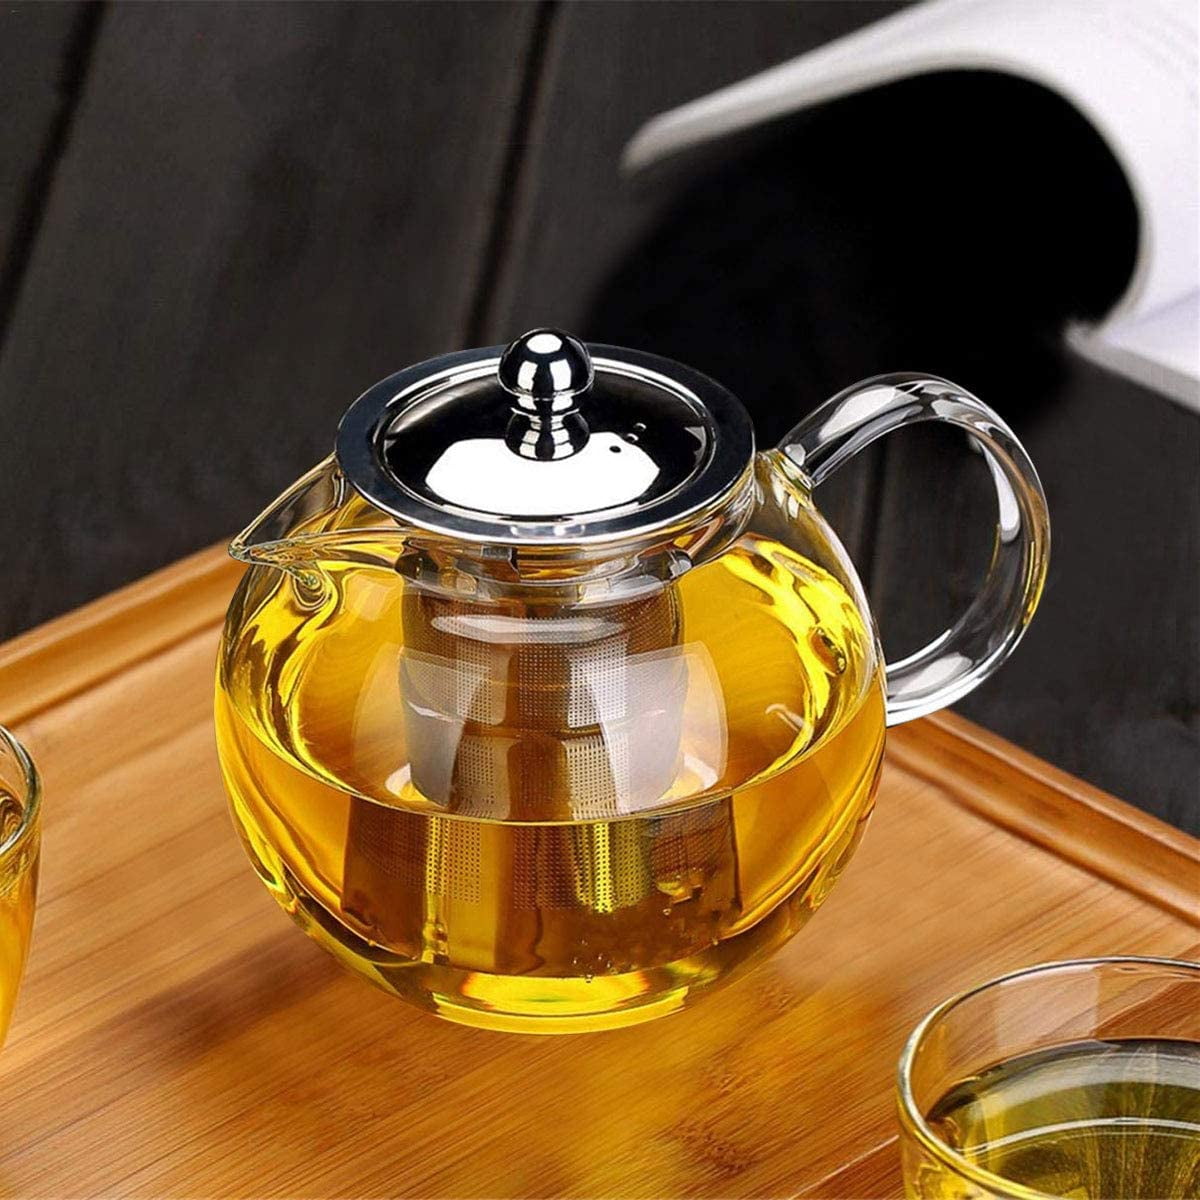 Glass Teapot With Tea Infuser, Heat Resistant Thickened Glass Tea Kettle  With Stainless Steel Tea Strainer, Blooming And Loose Leaf Tea Maker, Kung  Fu Tea Set, Perfect For Home Office Restaurant Family